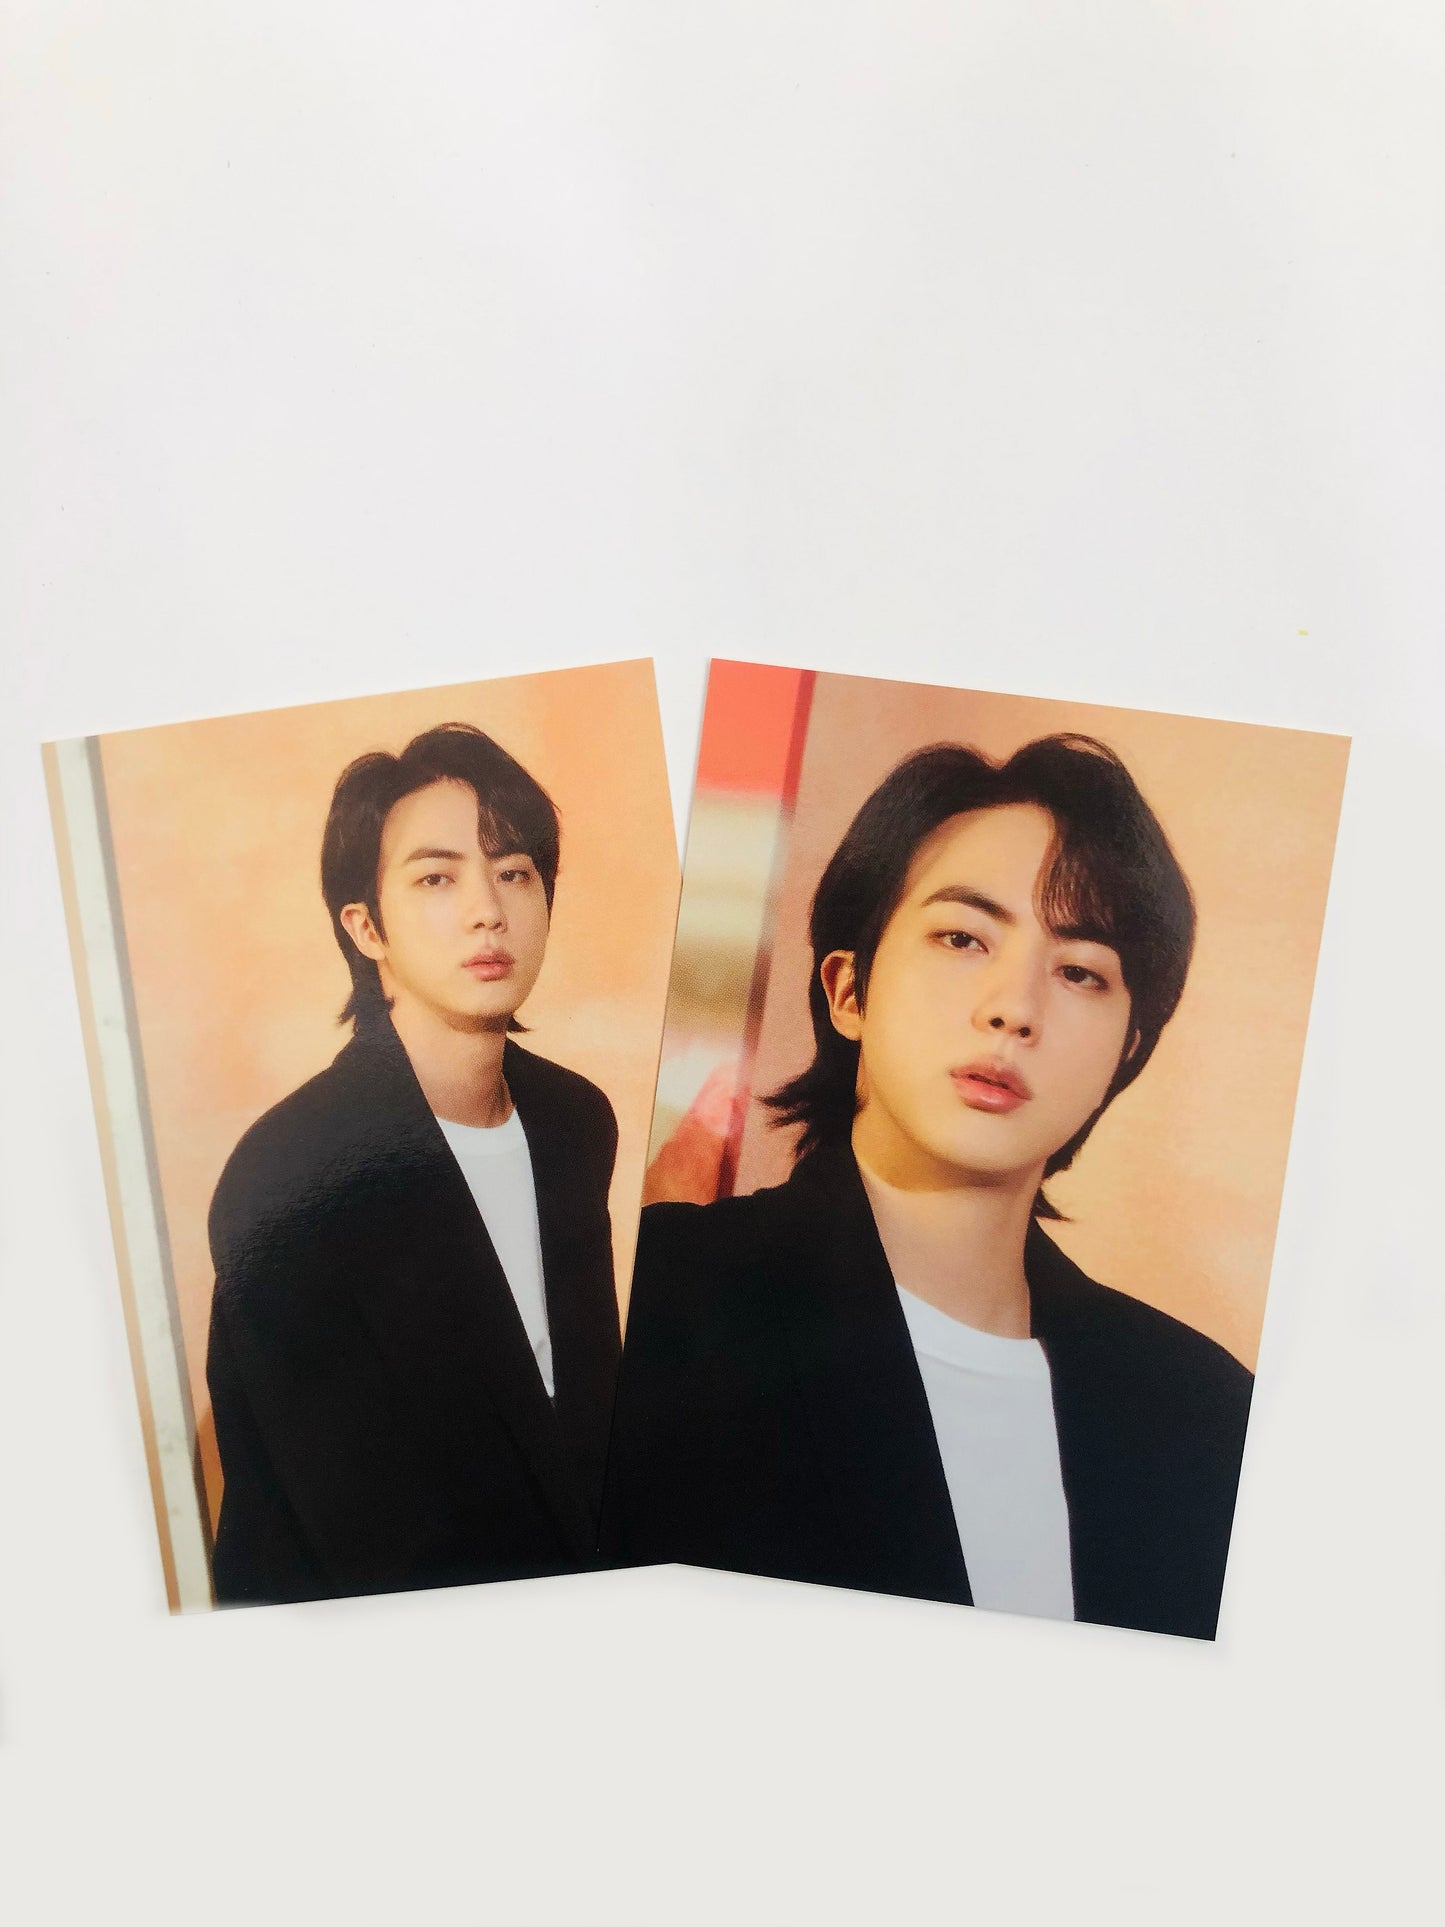 BTS The Daydream Believers Official Photocards